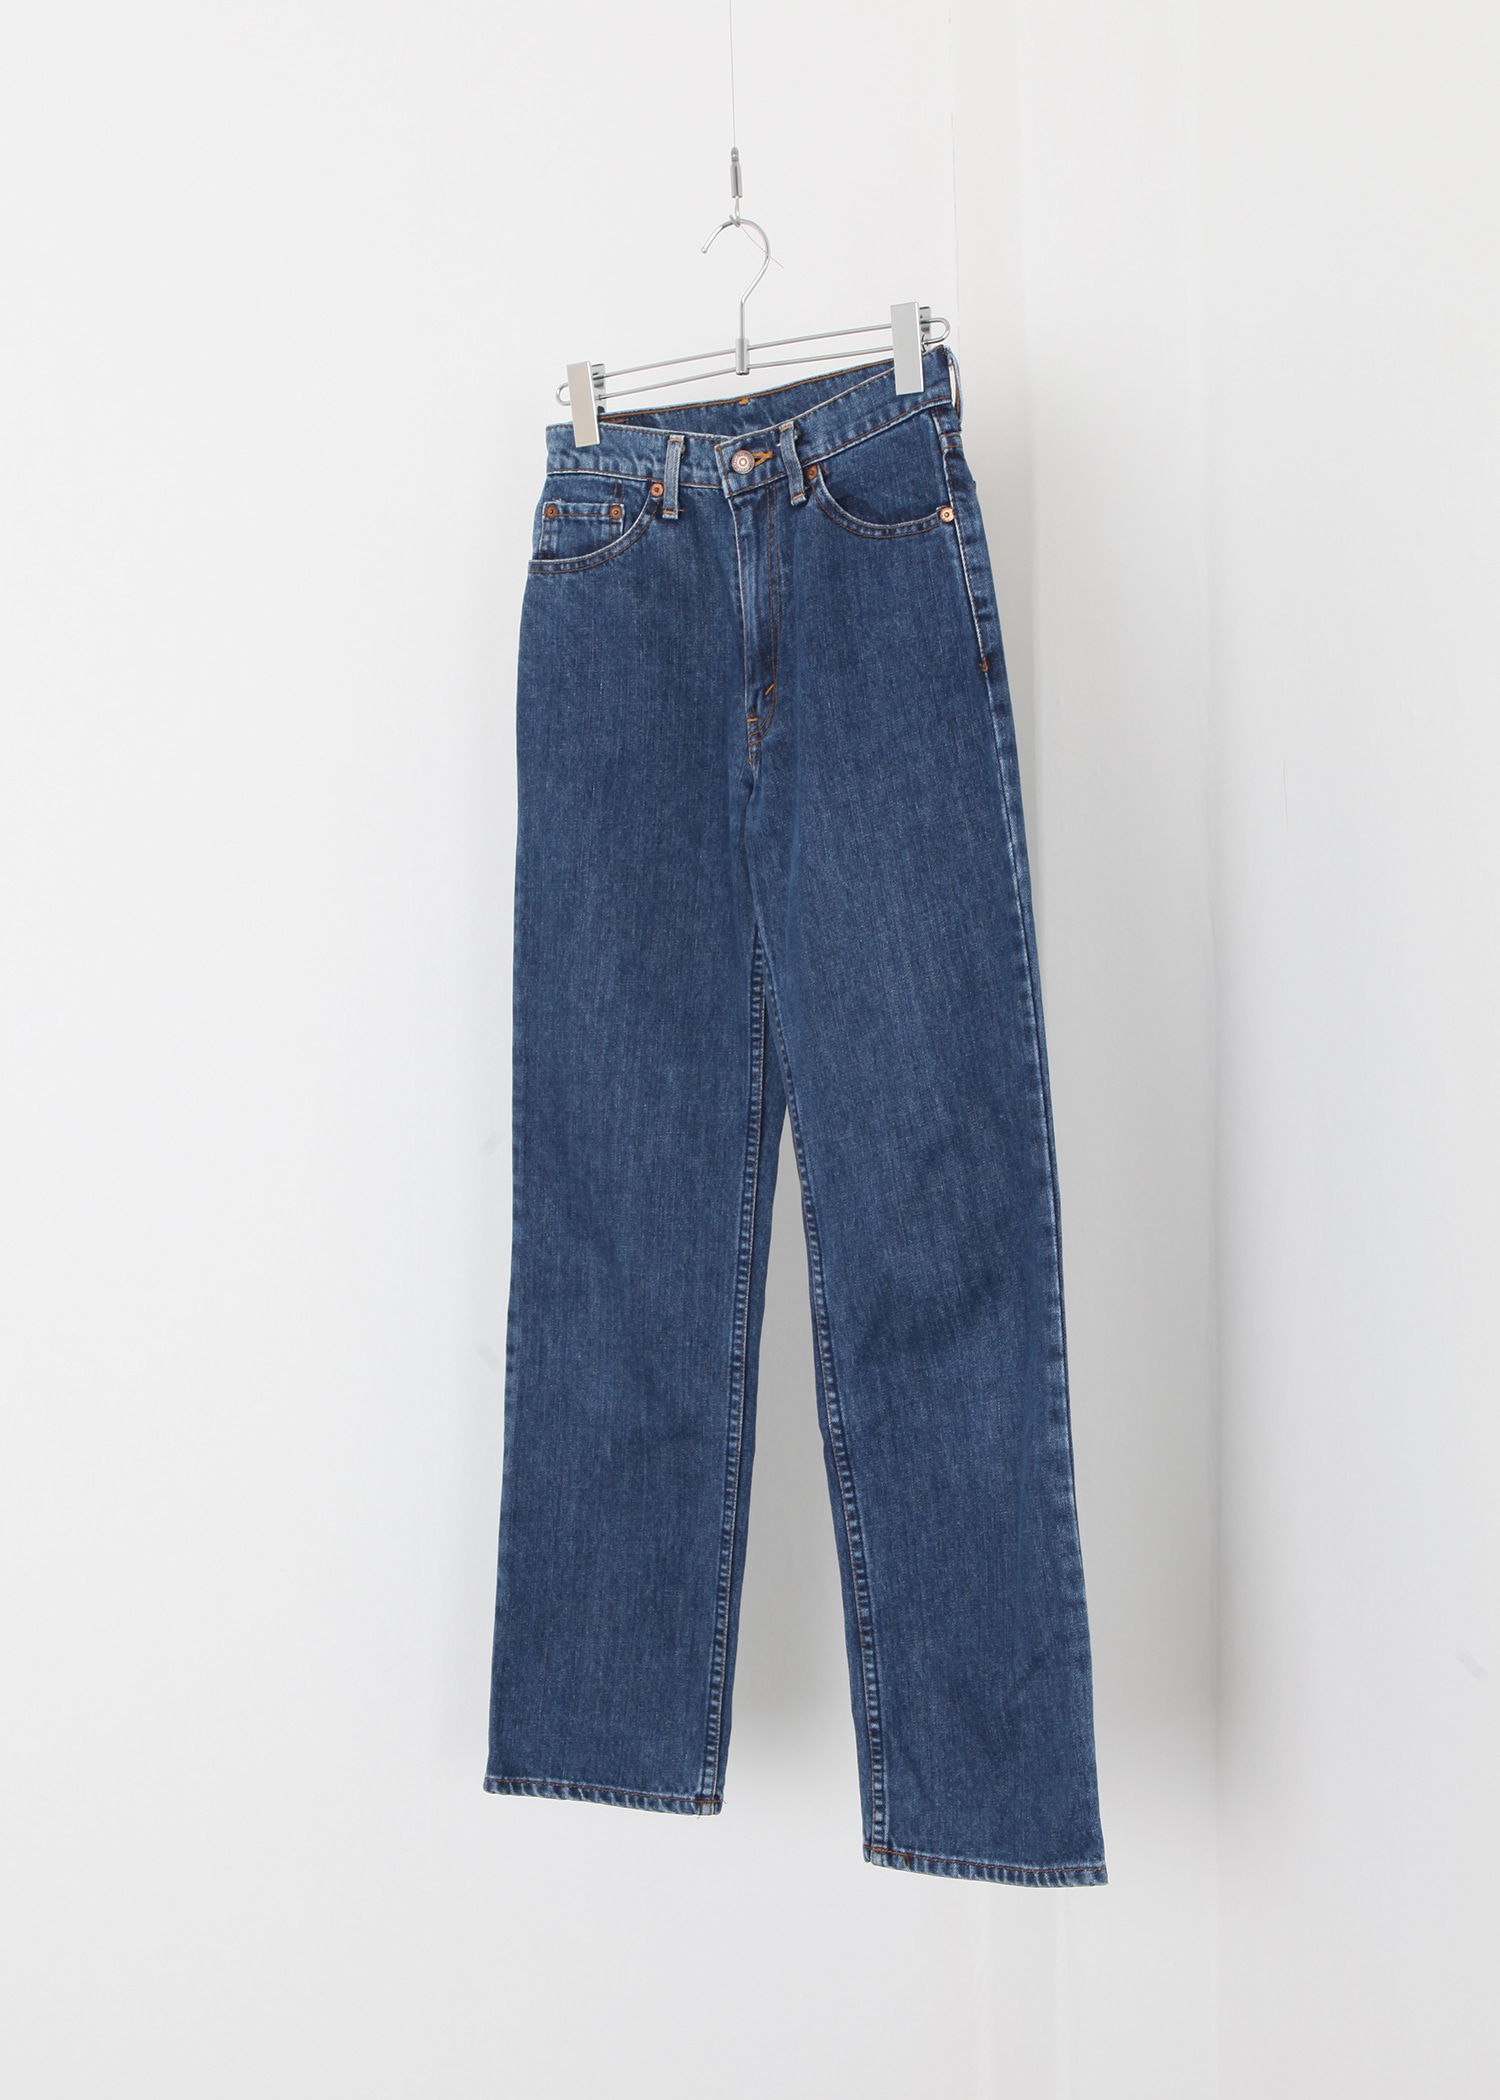 Levis 515 (Made in Japan)